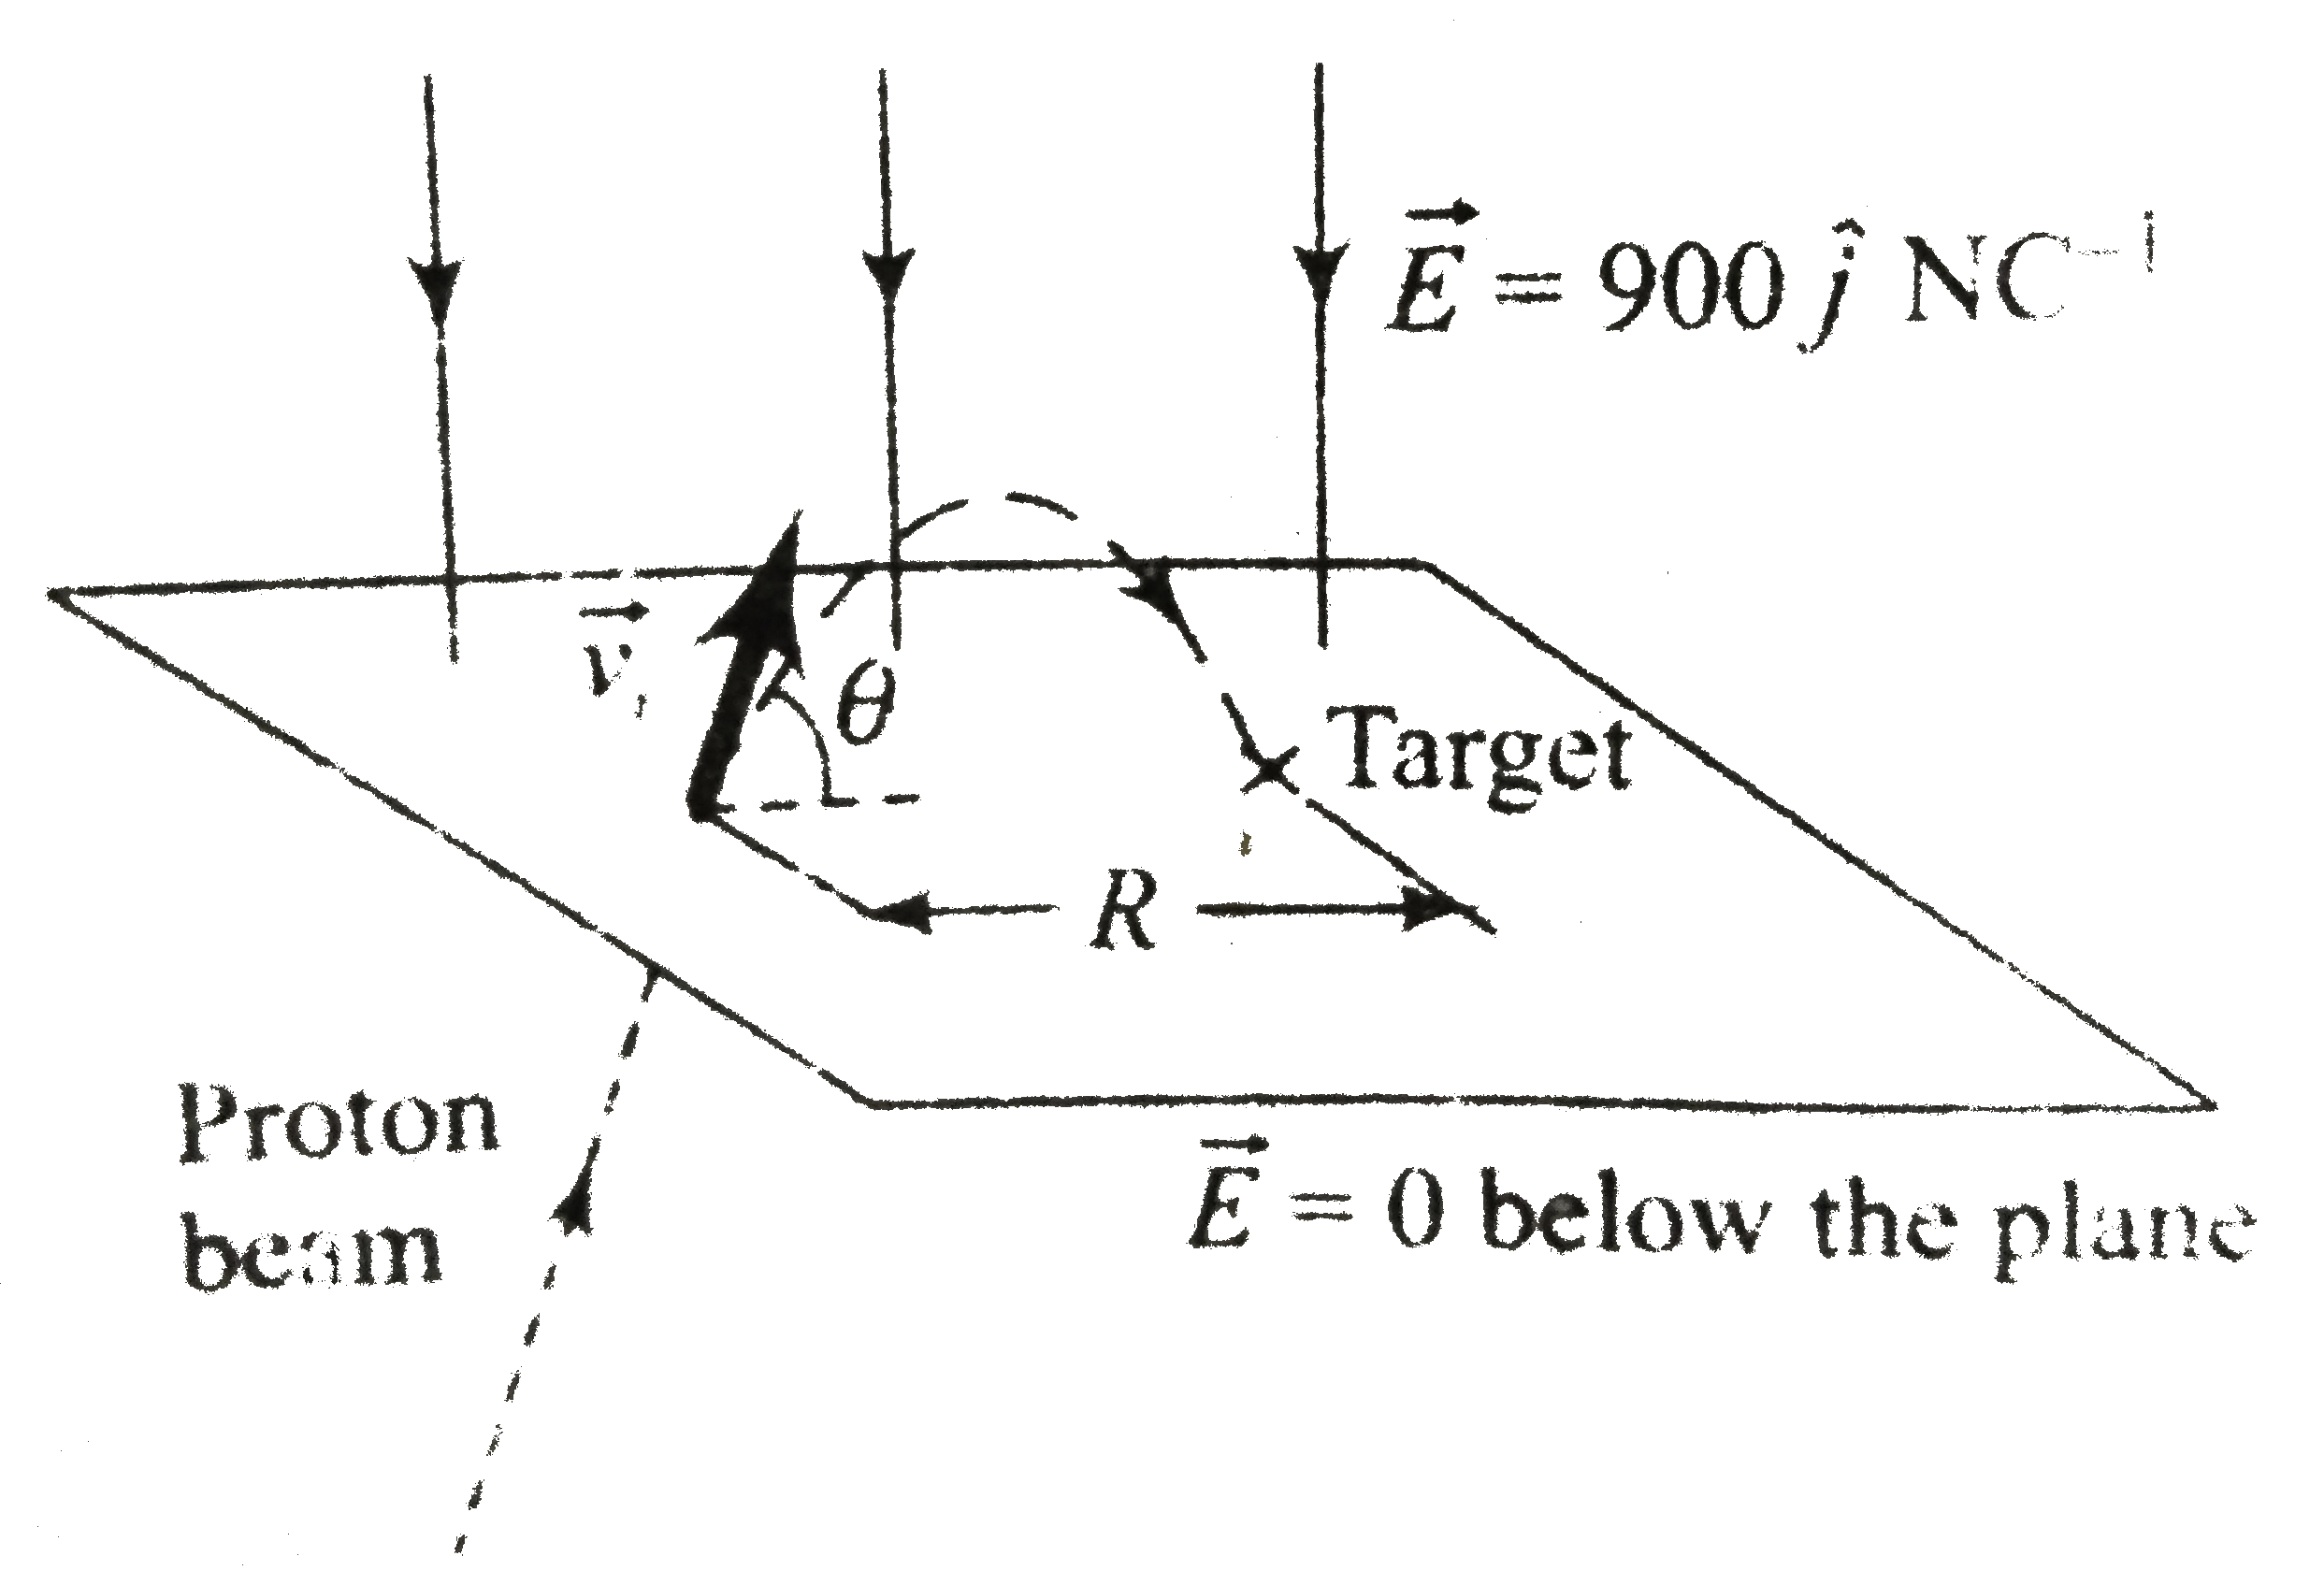 Protons are projected with an initial speed v(i)=6kms^(-1) from a fileds-free region vec(E ) =-900hat jNC^(-1) present above the plane as shown in fig. The initial velocity vector of the protons makes an angle u with the plane. The proton are to hit a target that lies at a horizontal cross the plane and enter the electric field. Find the angle theta at which the protons must pass through the plane to strike the target.